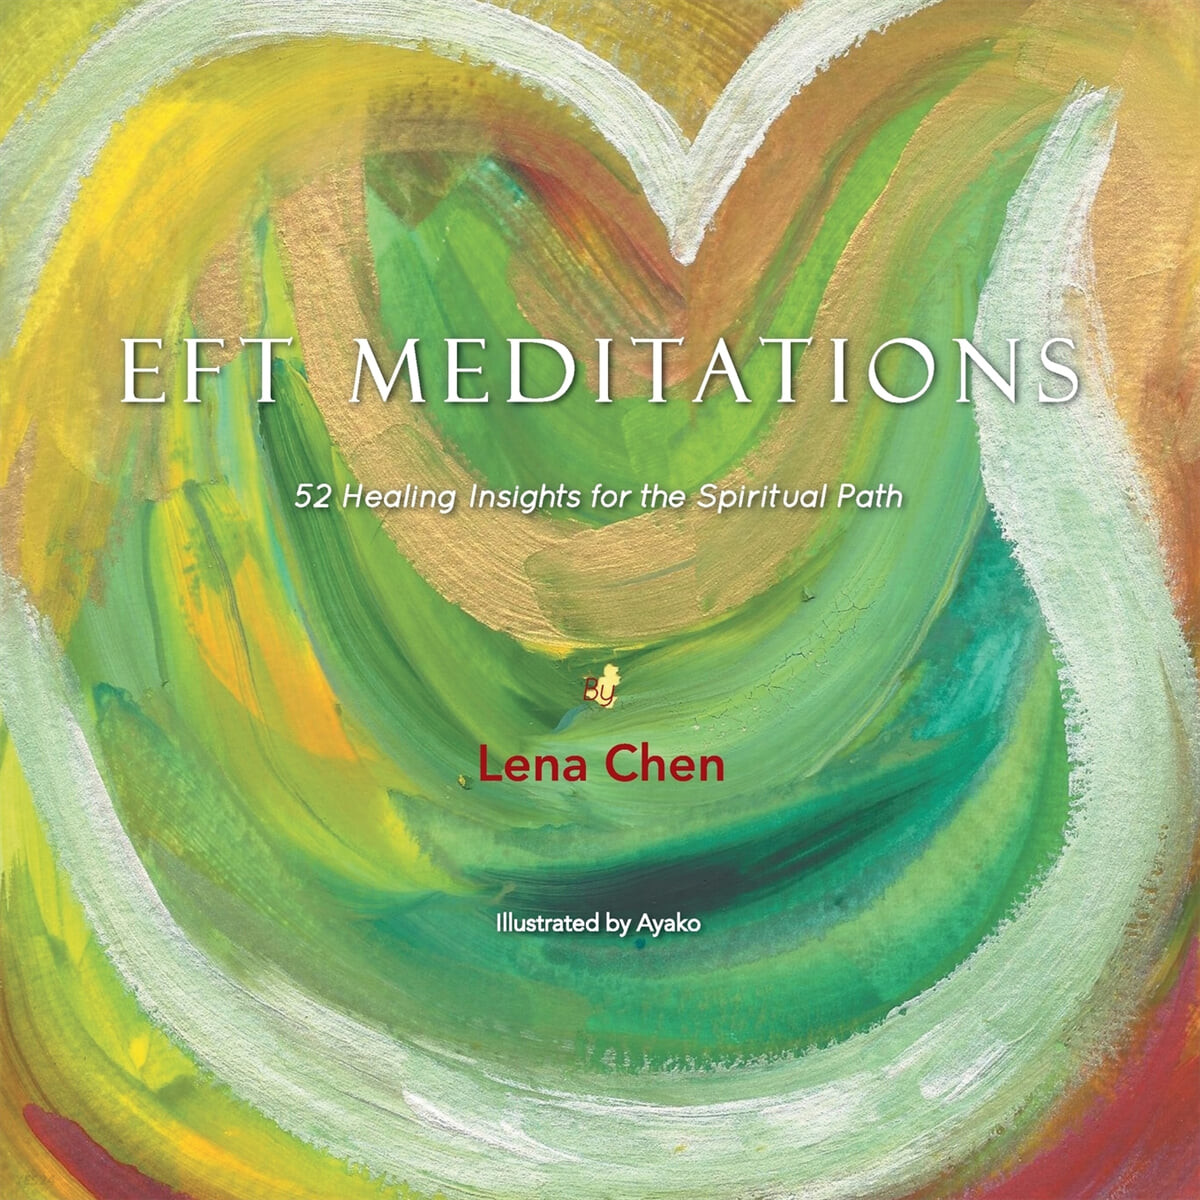 Eft Meditations (52 Healing Insights for the Spiritual Path)